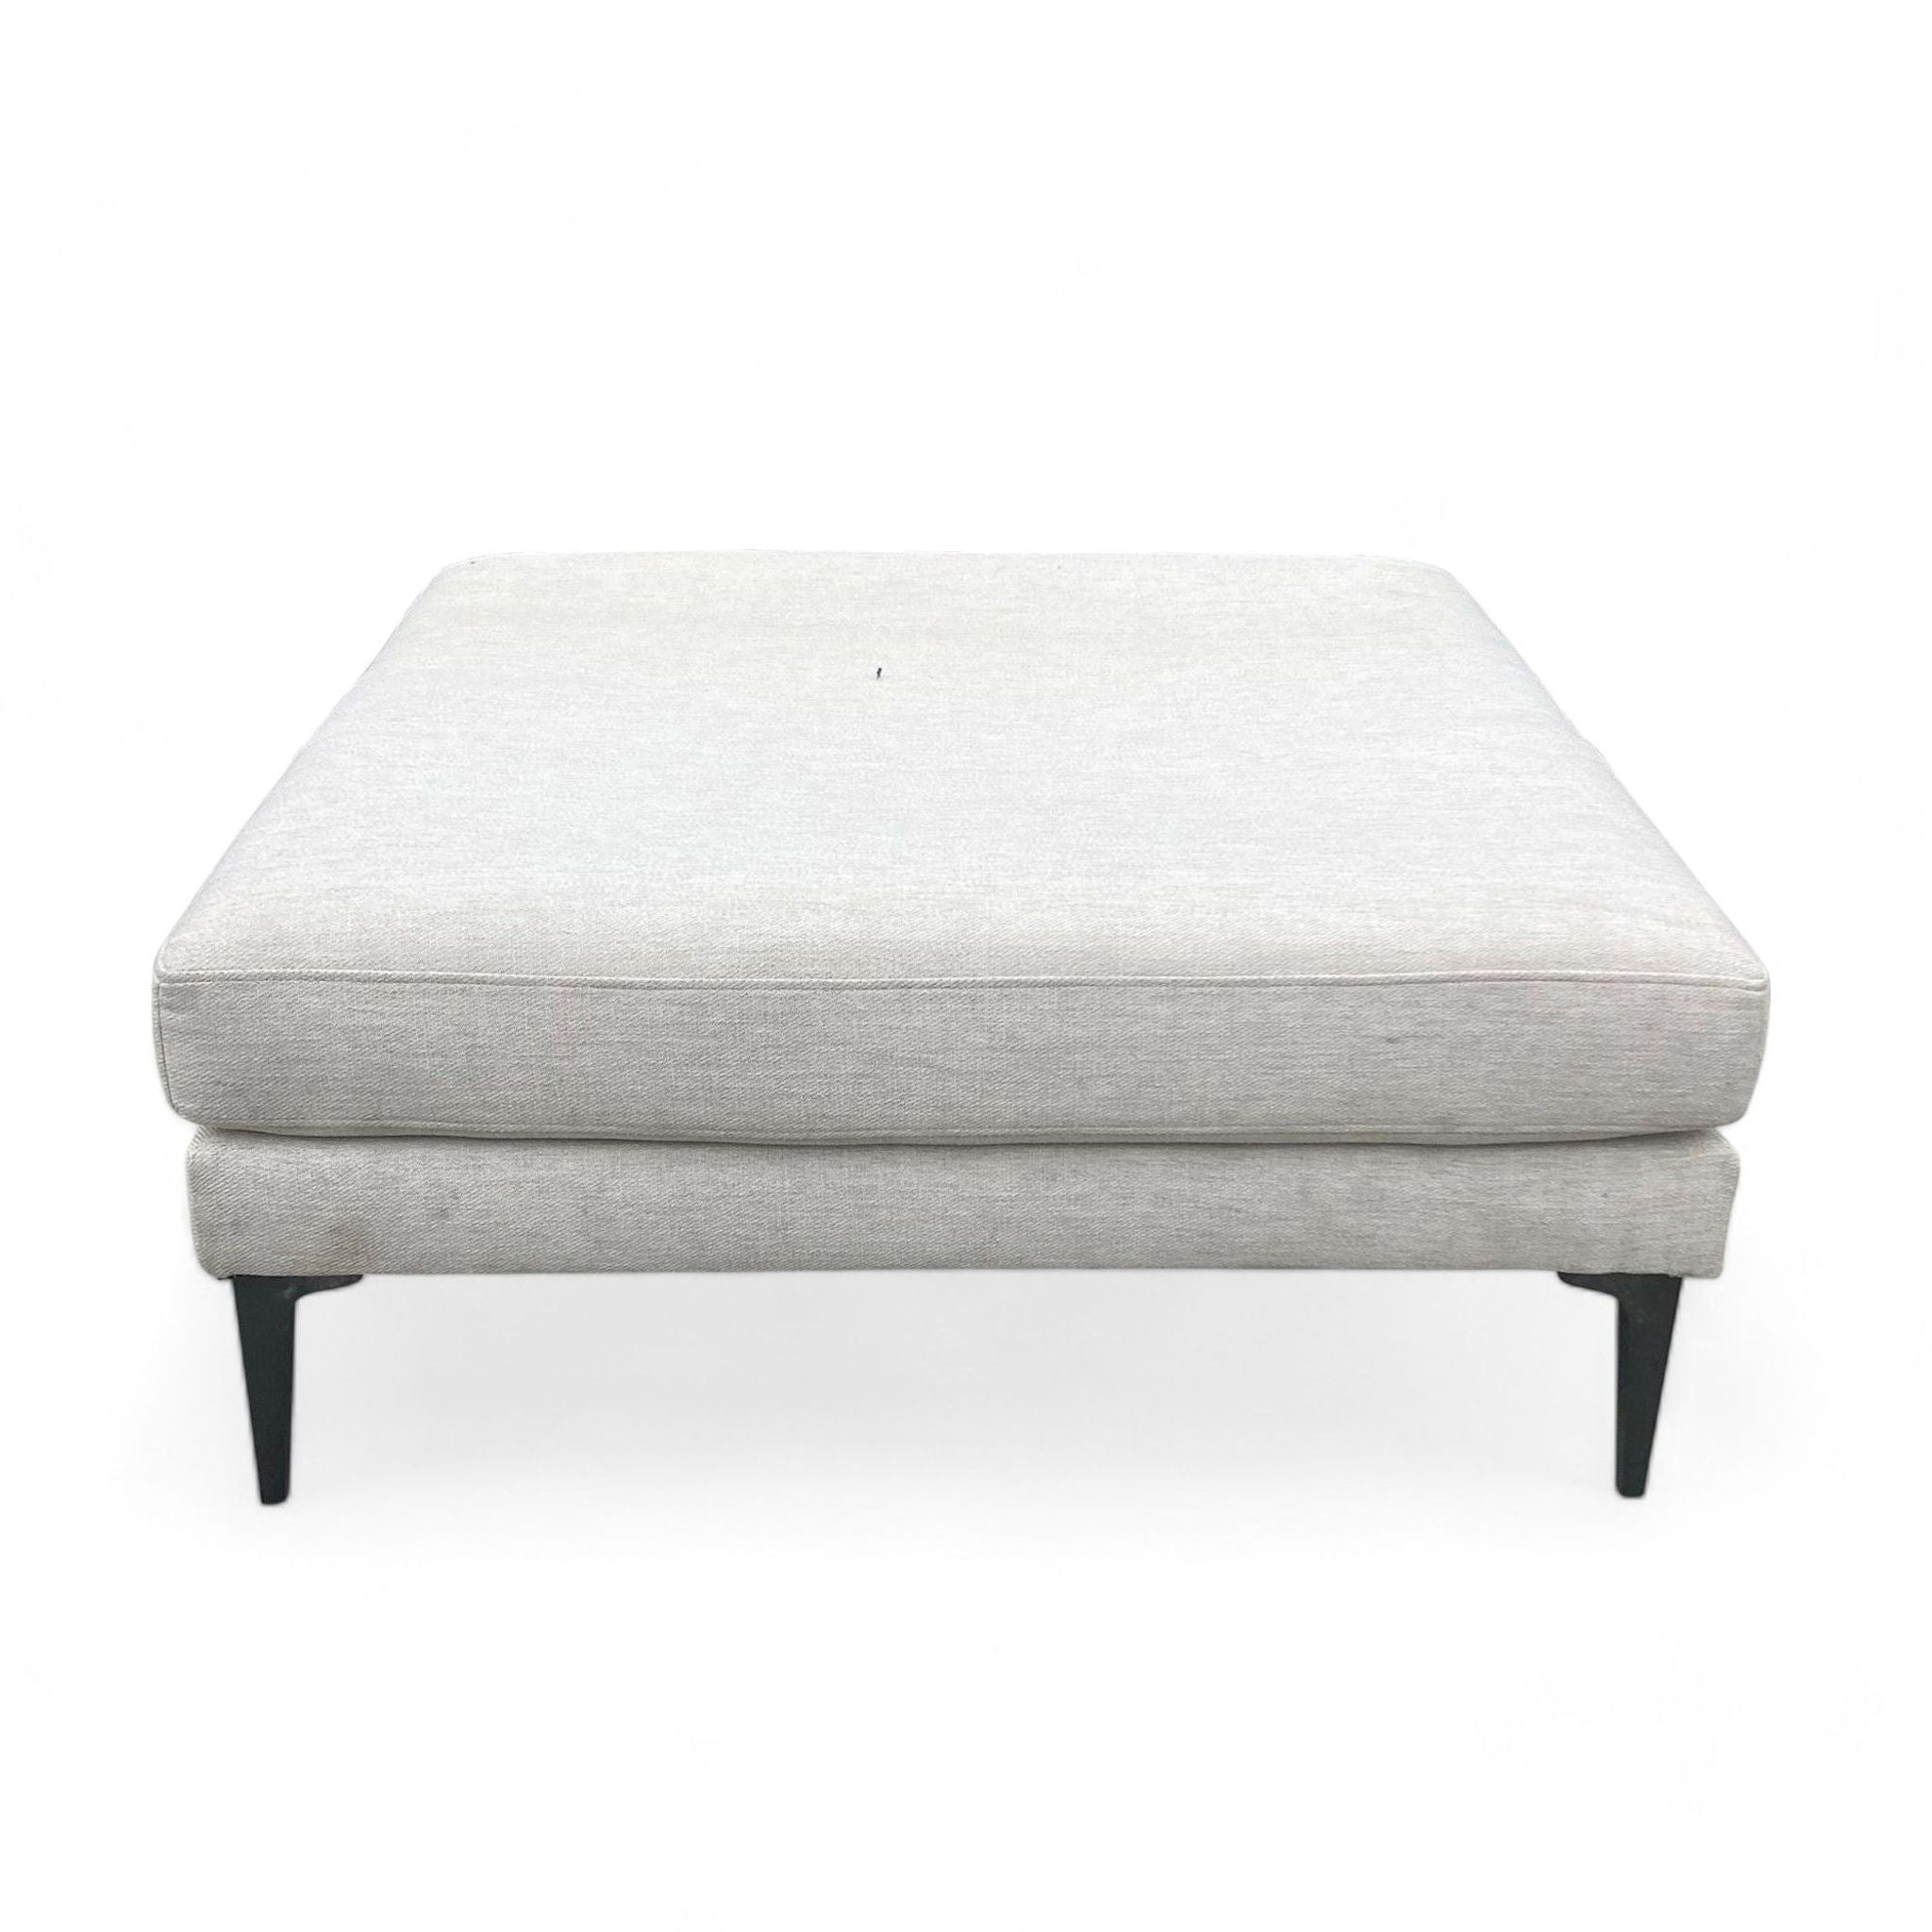 Alt text 1: West Elm modern Andes large square ottoman with wheat twill fabric upholstery and dark pewter metal legs.